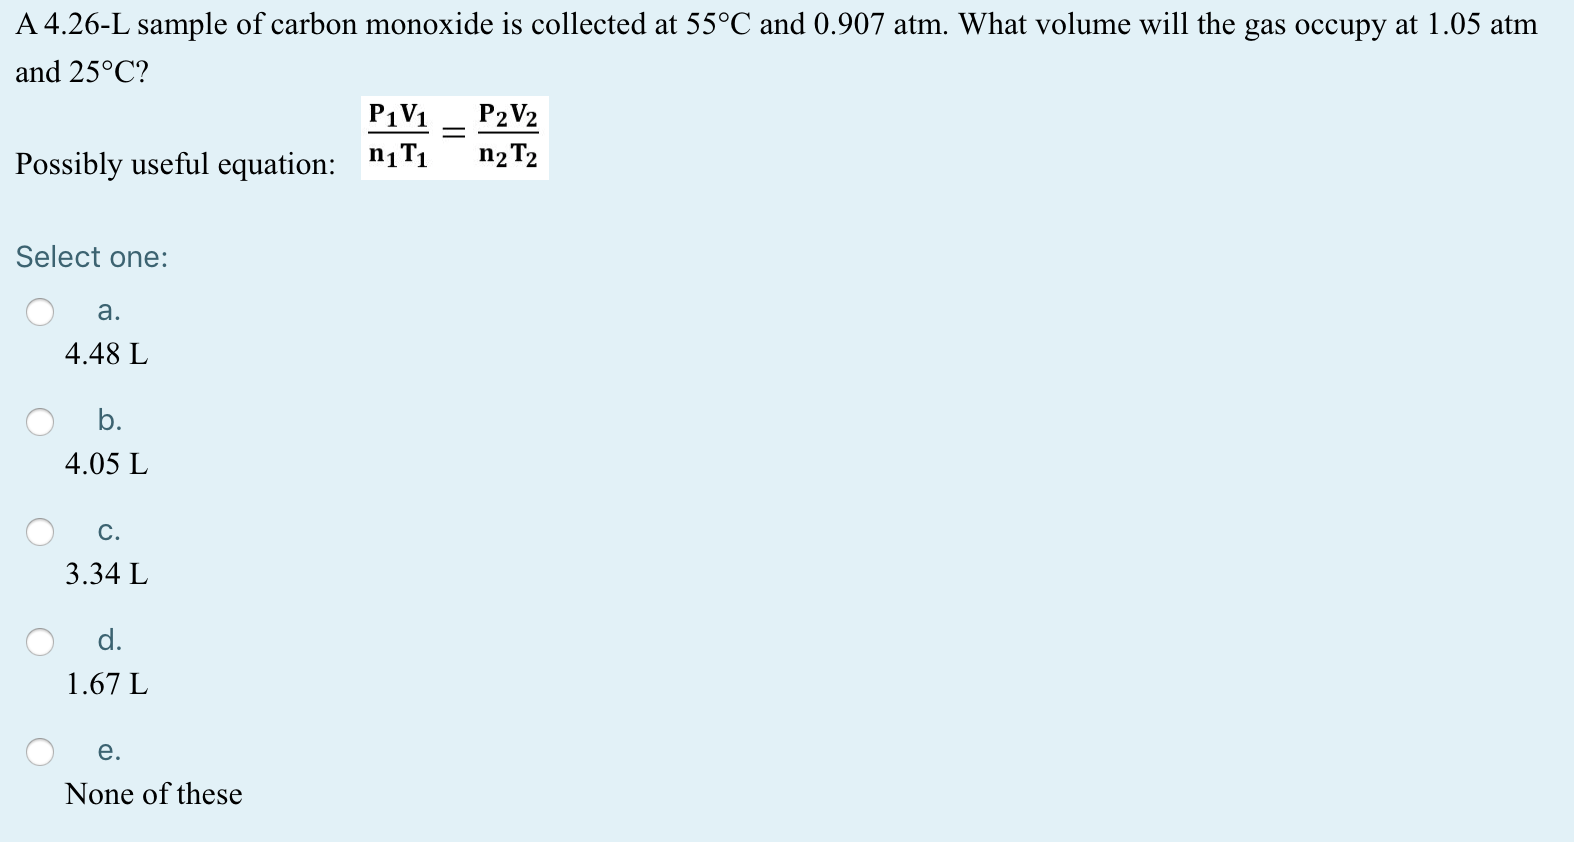 A 4.26-L sample of carbon monoxide is collected at 55°C and 0.907 atm. What volume will the gas occupy at 1.05 atm
and 25°C?
P1V1
P2V2
n2 T2
Possibly useful equation: "1T1
Select one:
a.
4.48 L
b.
4.05 L
C.
3.34 L
d.
1.67 L
e.
None of these
